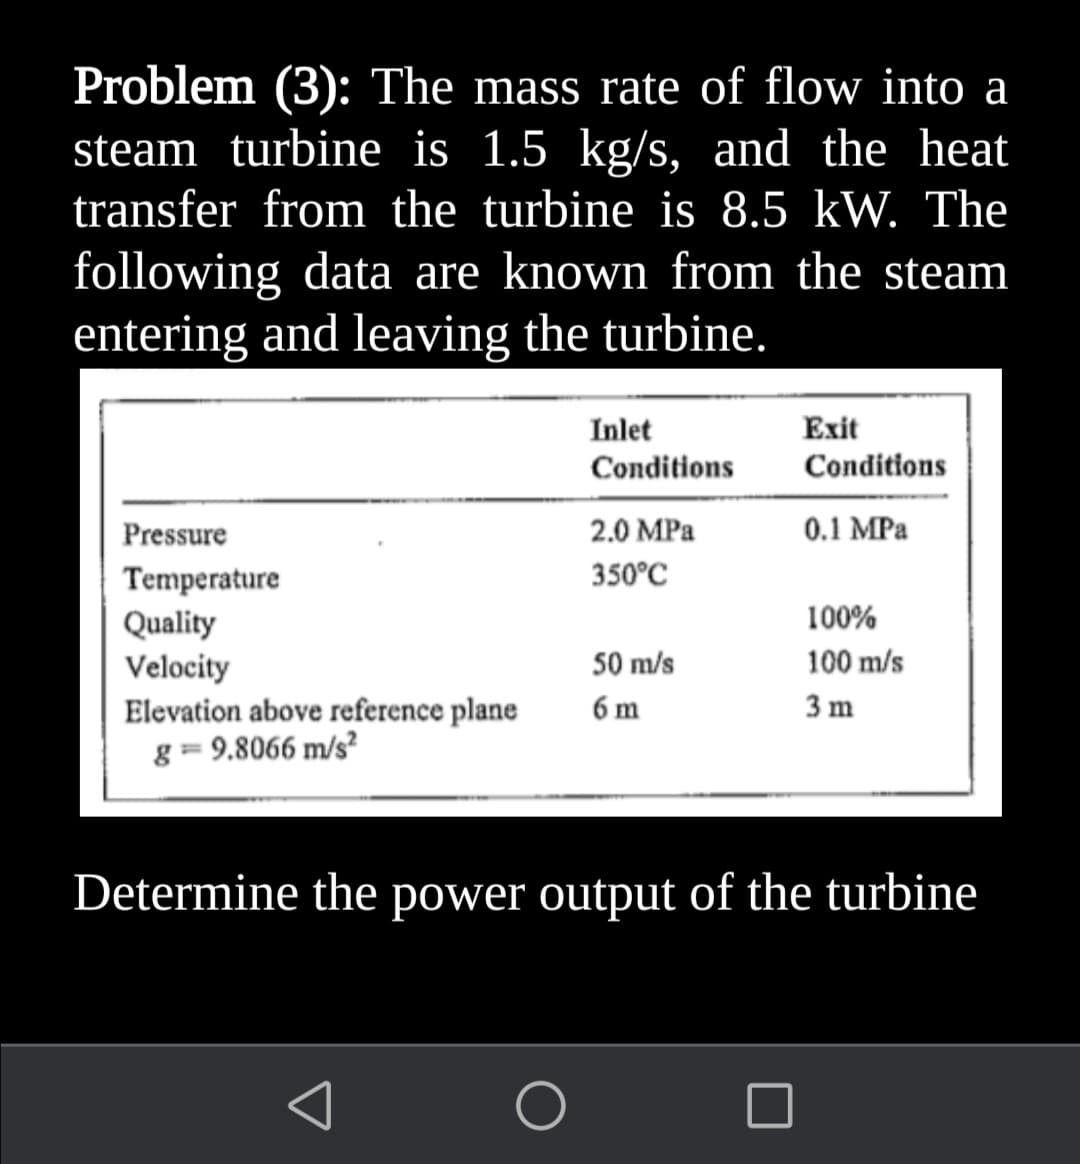 Problem (3): The mass rate of flow into a
steam turbine is 1.5 kg/s, and the heat
transfer from the turbine is 8.5 kW. The
following data are known from the steam
entering and leaving the turbine.
Inlet
Exit
Conditions
Conditions
Pressure
2.0 MPa
0.1 MPa
350°C
Temperature
Quality
Velocity
Elevation above reference plane
g = 9.8066 m/s²
100%
50 m/s
100 m/s
6 m
3 m
Determine the power output of the turbine
